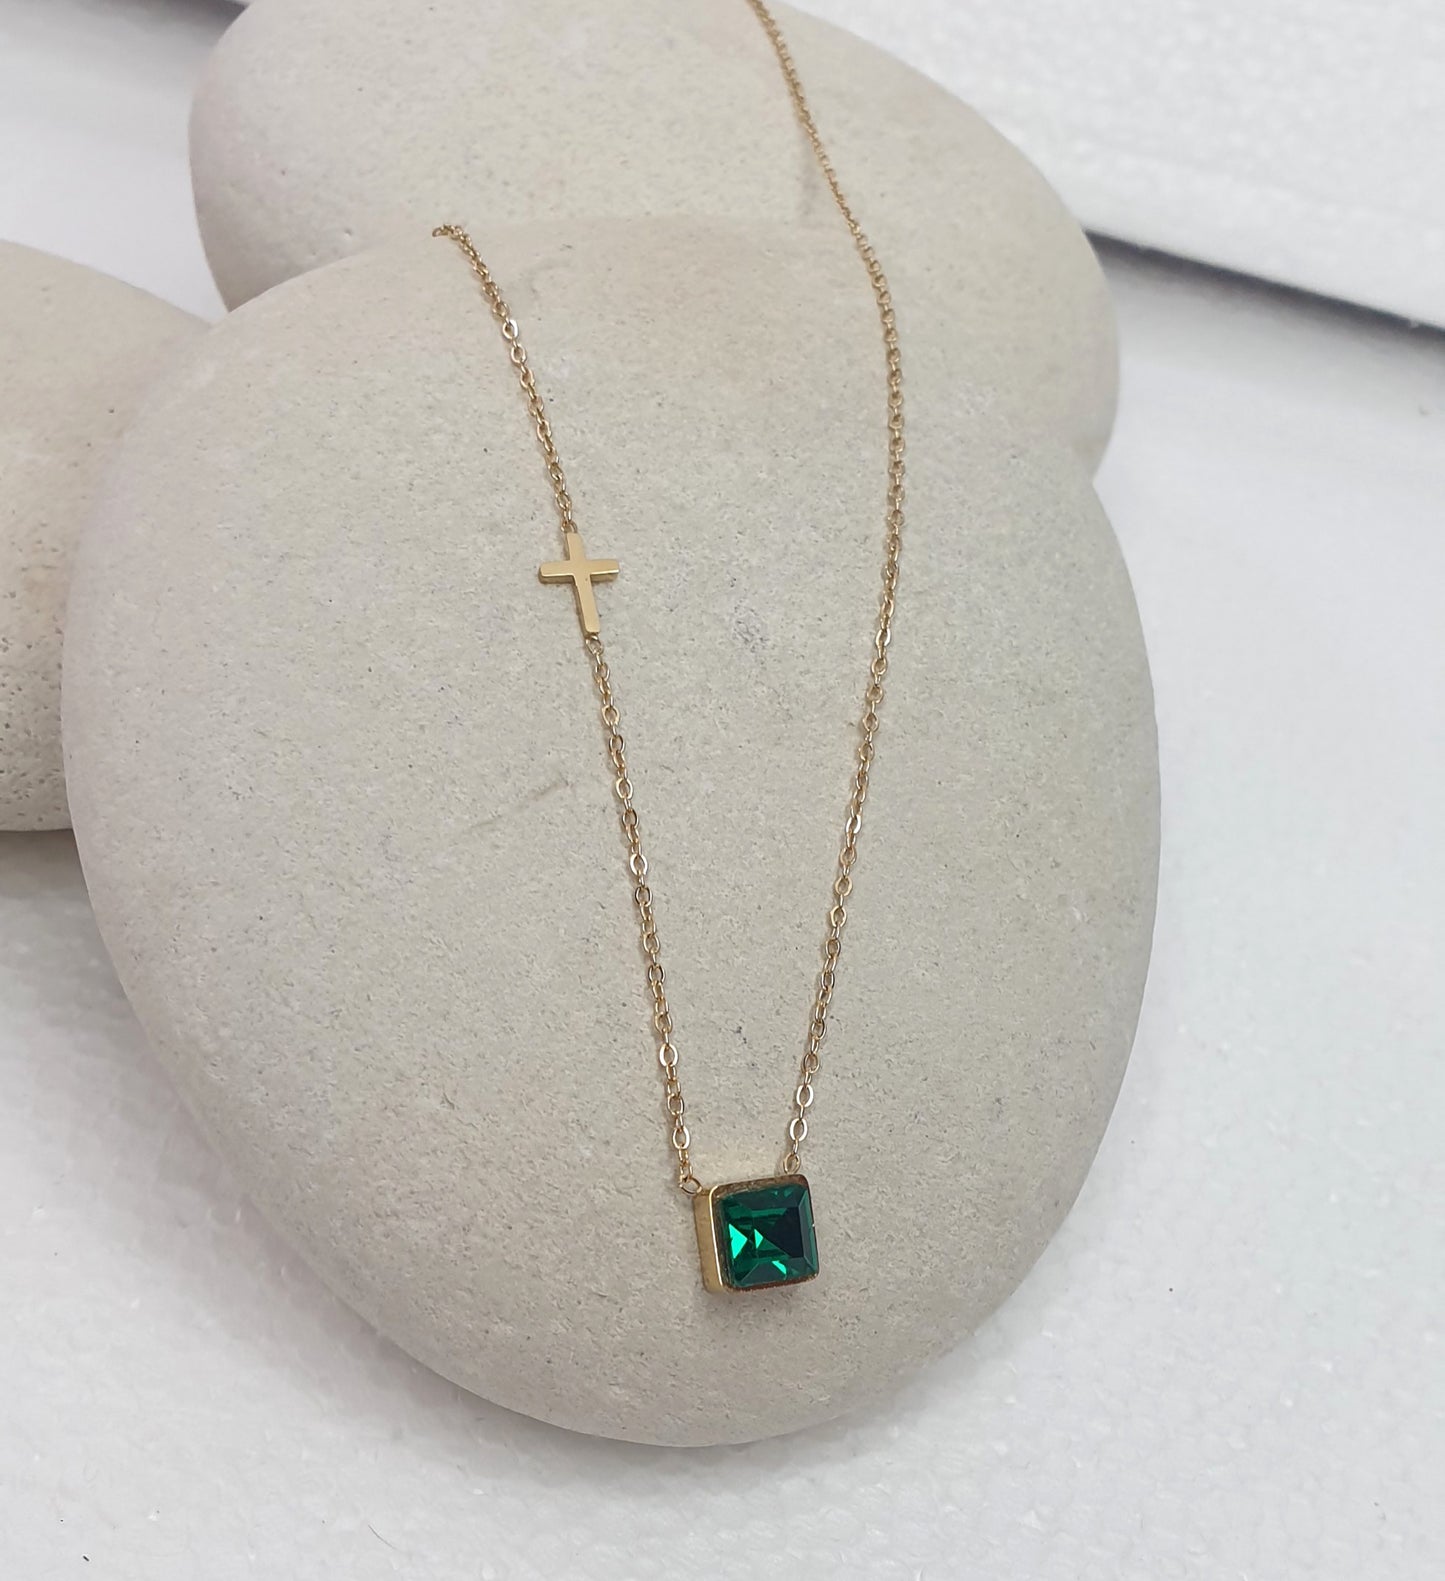 Green Gemstone necklace with cross